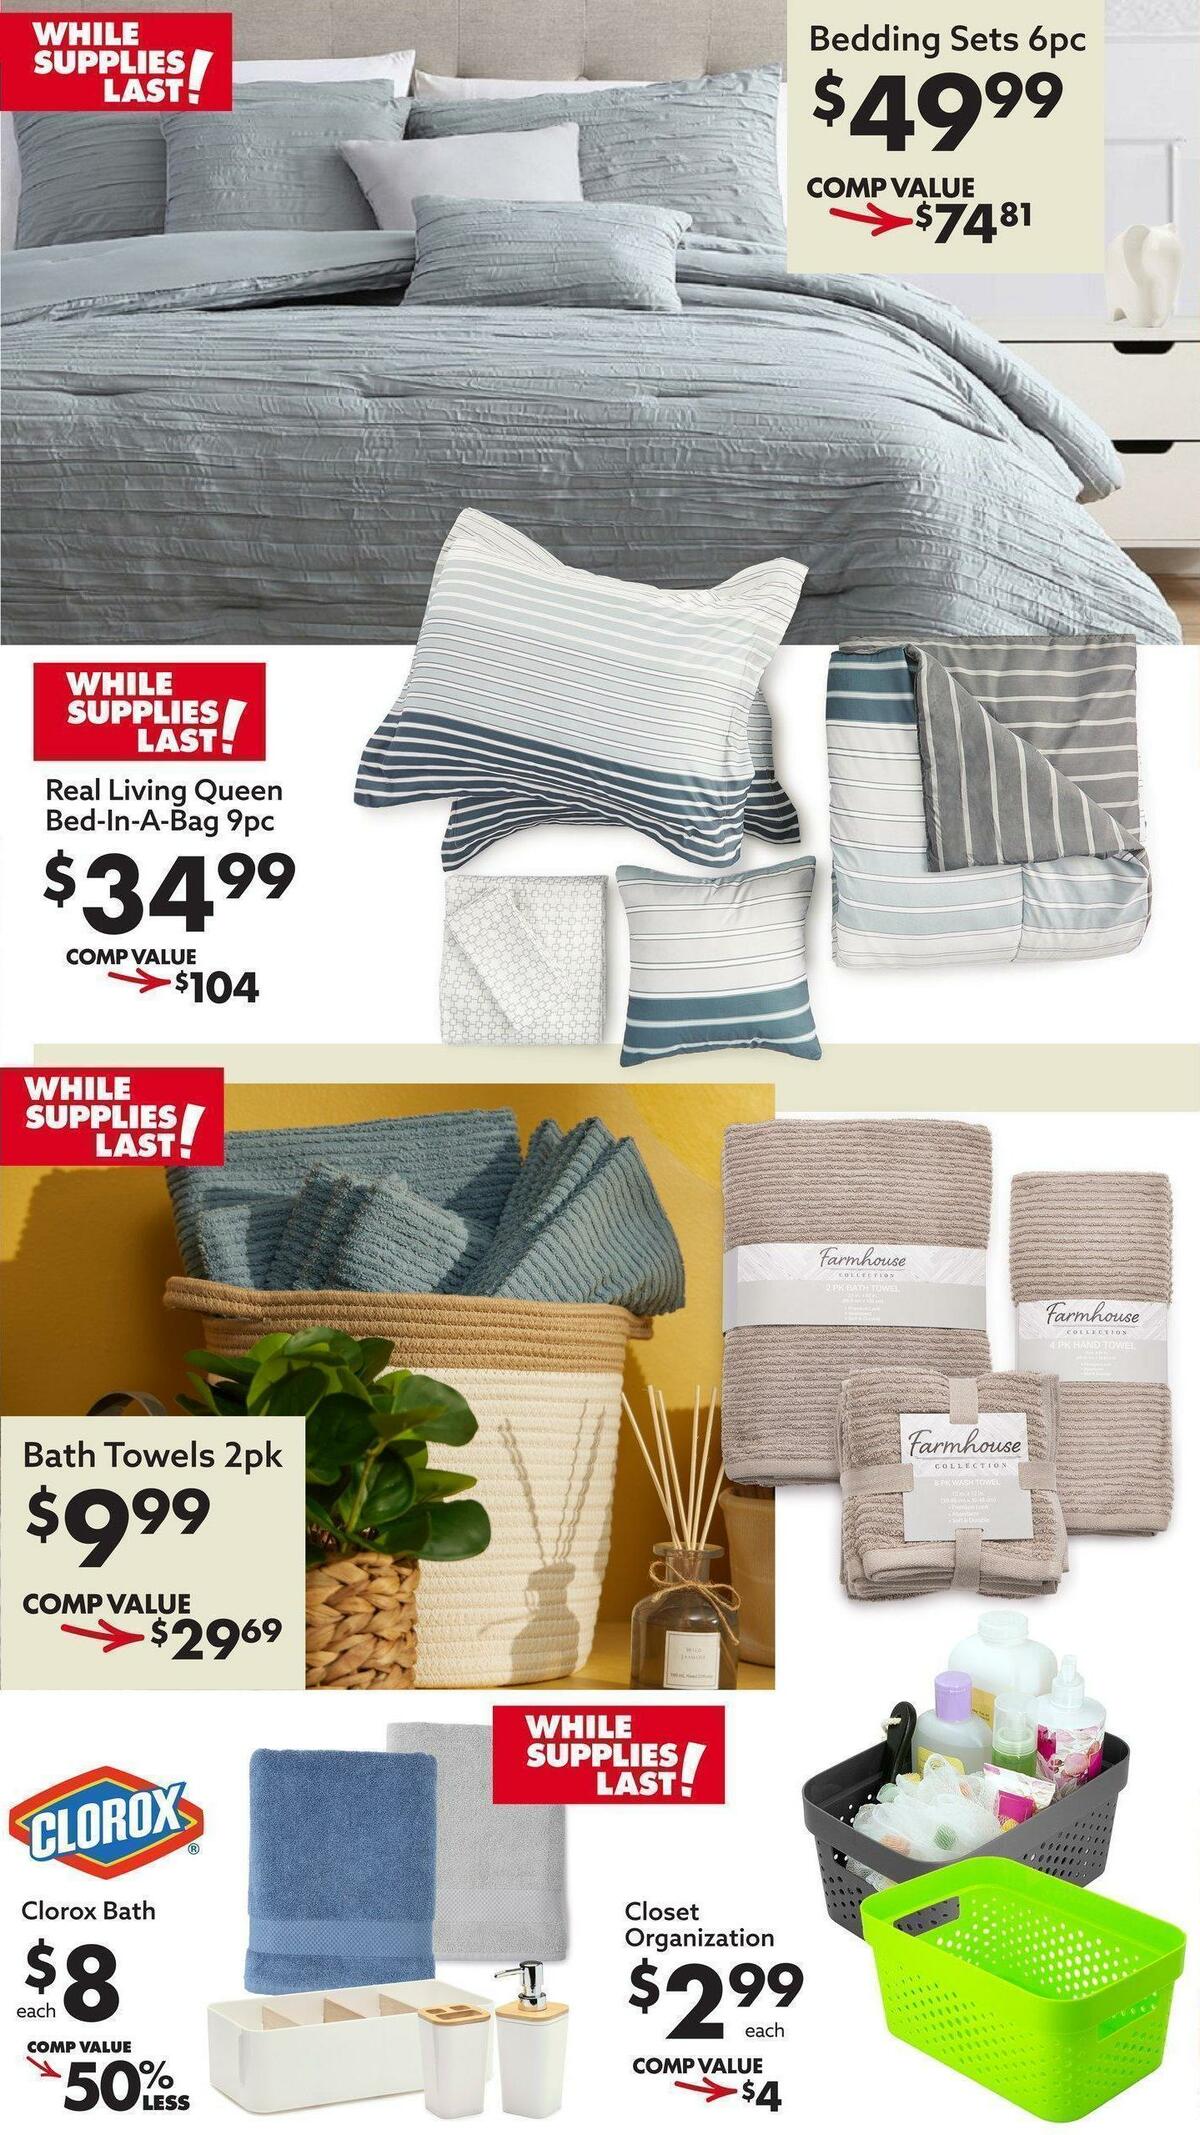 Big Lots Weekly Ad from January 28